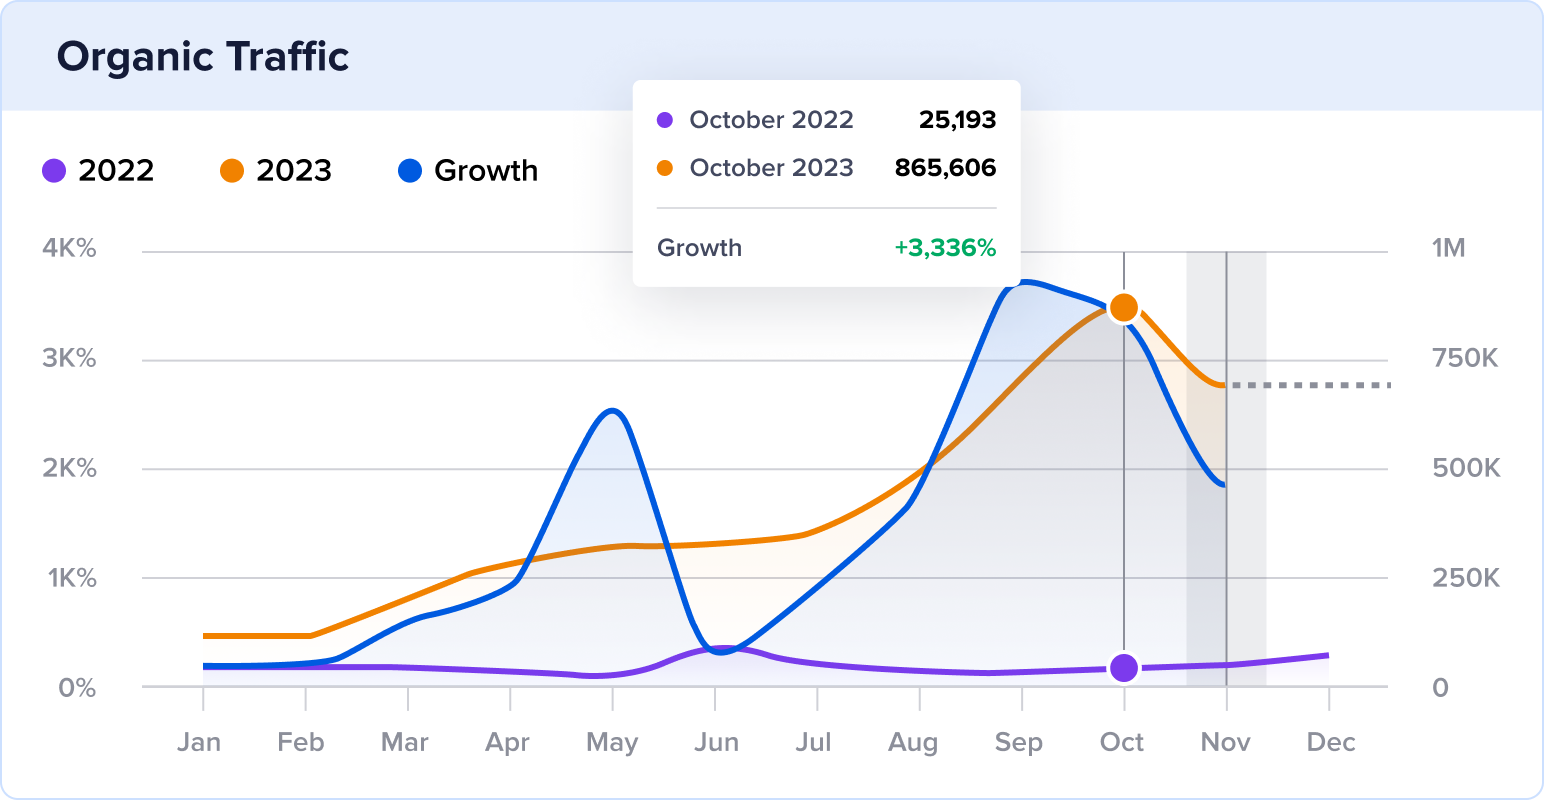 All About Cookies organic traffic growth of 3,336% YoY.